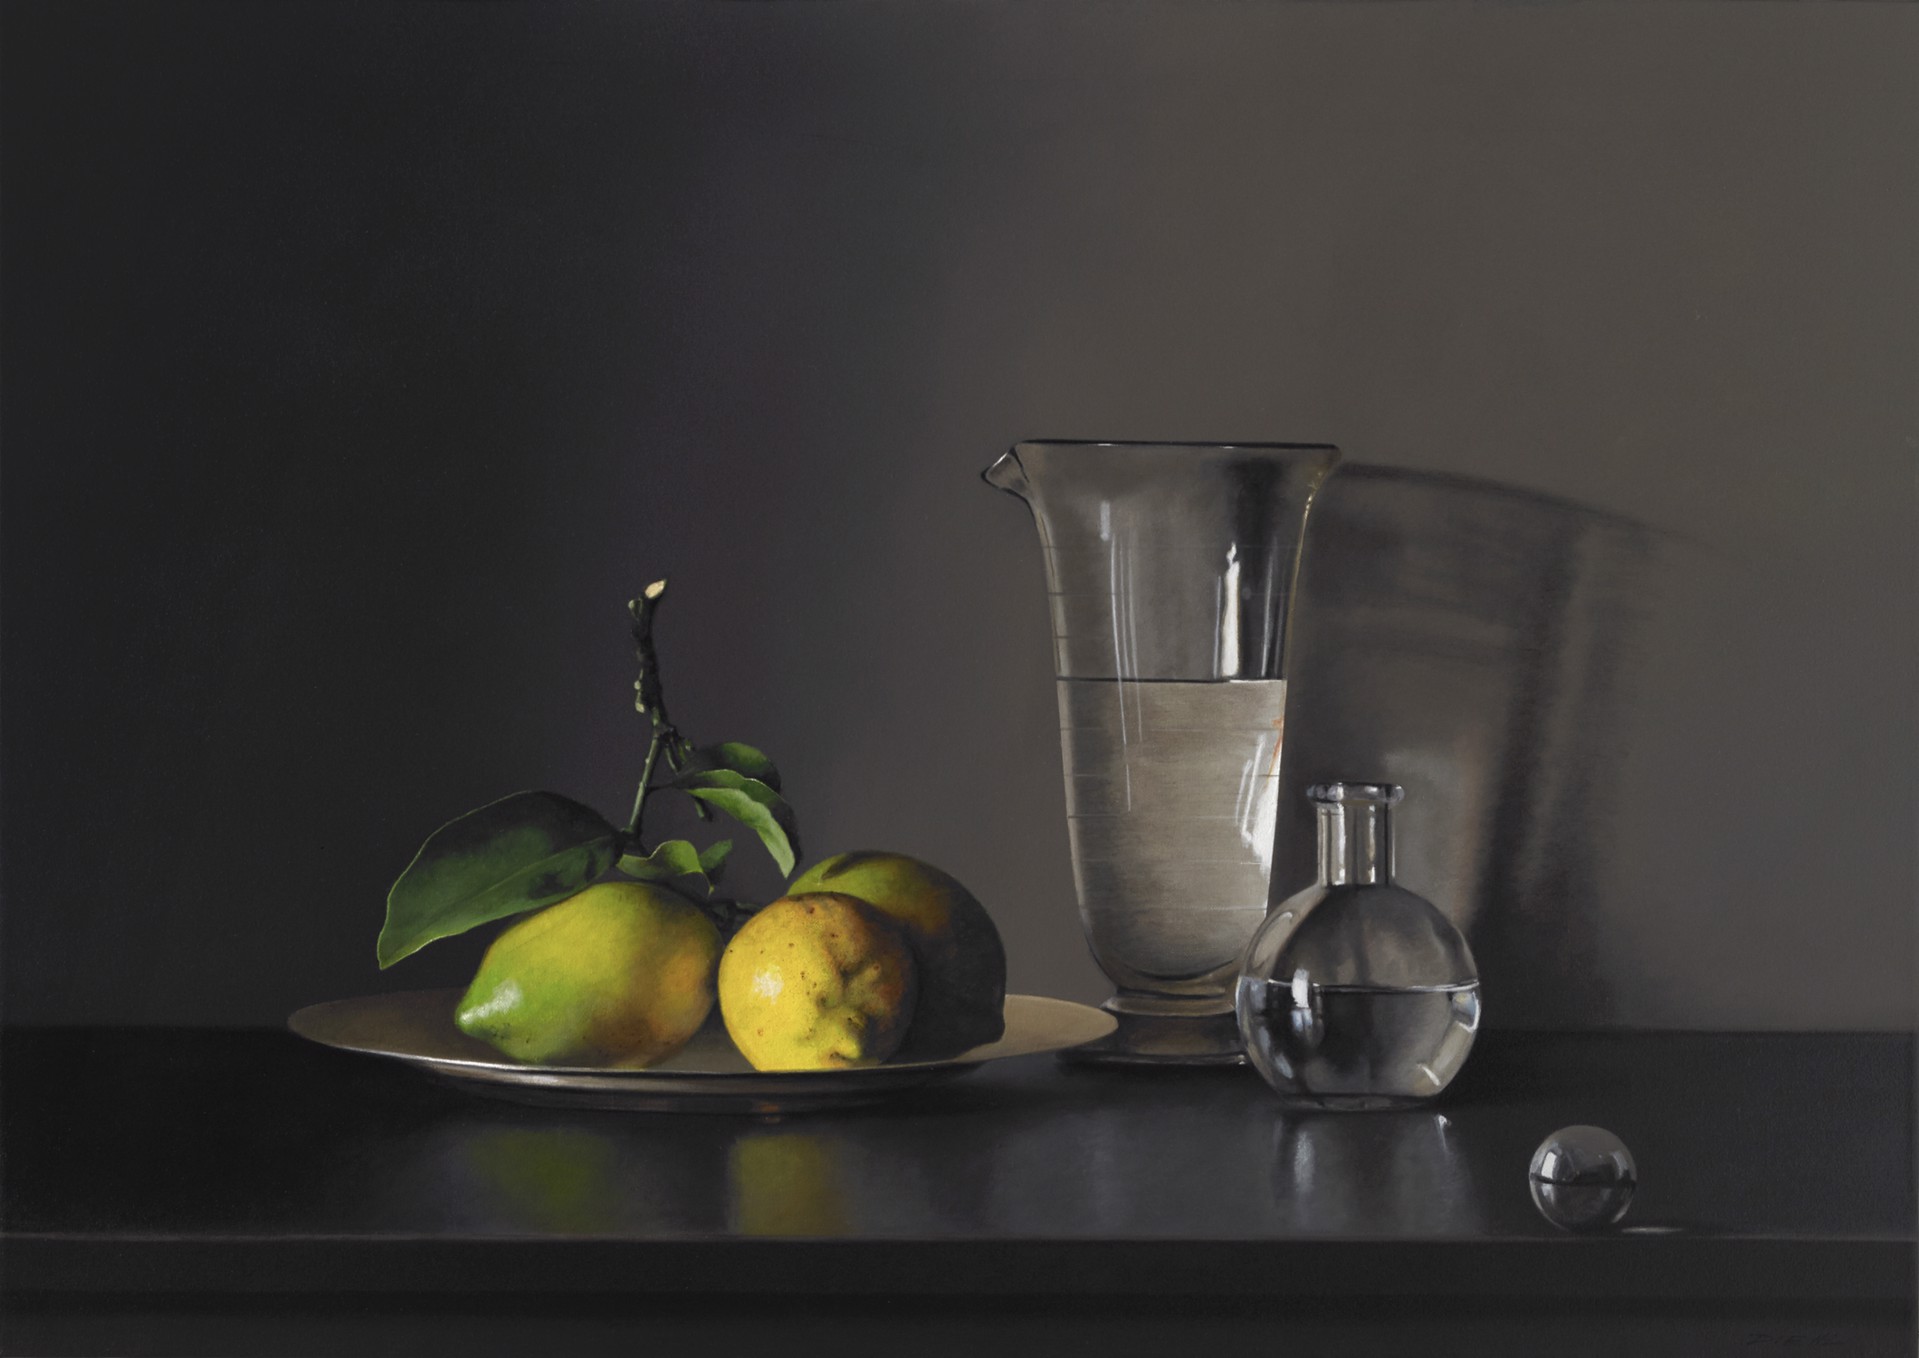 Still Life with the Inevitable #2 by Guy Diehl